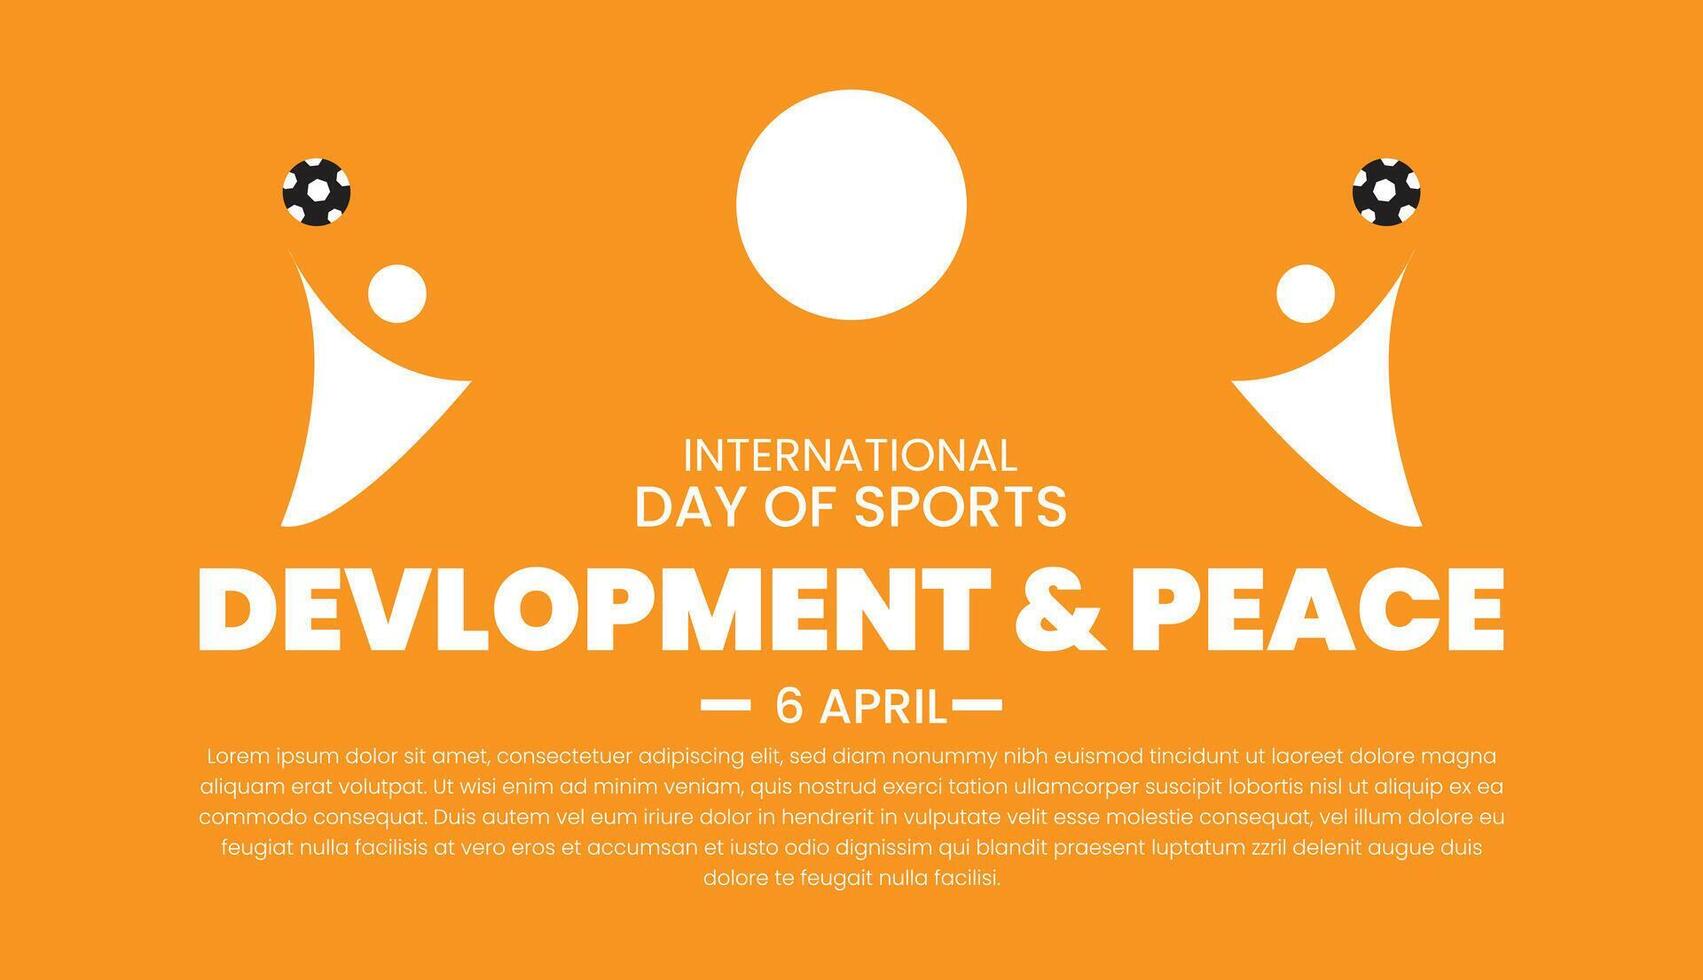 international day of sports devlopment and peace vector